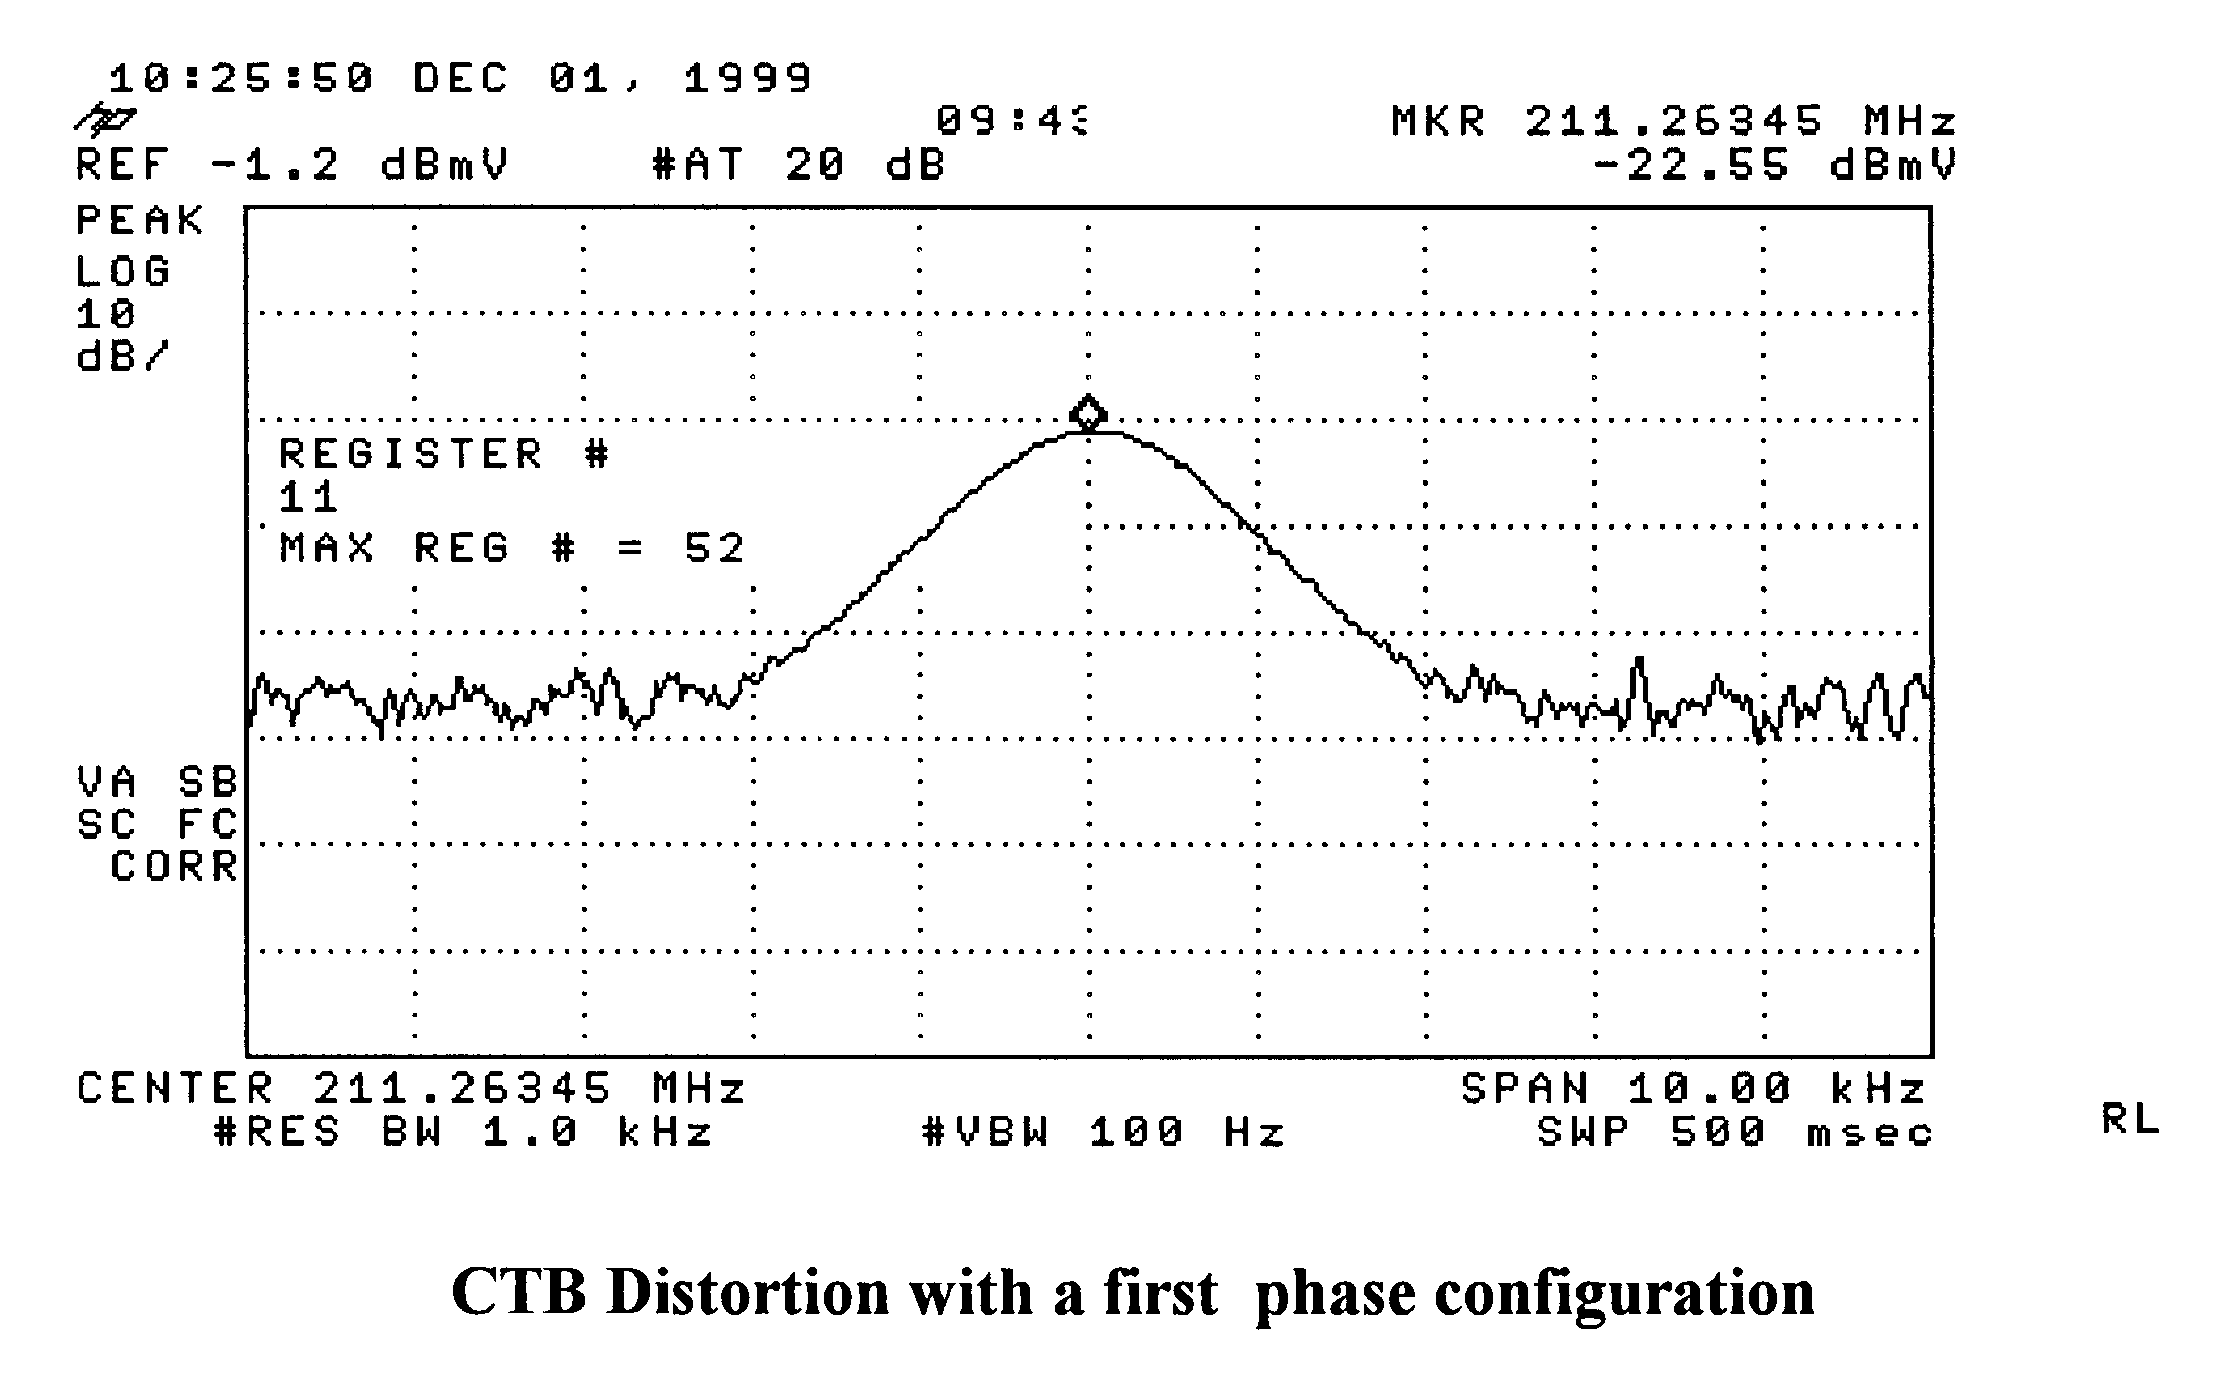 Measuring composite distortion using a coherent multicarrier signal generator